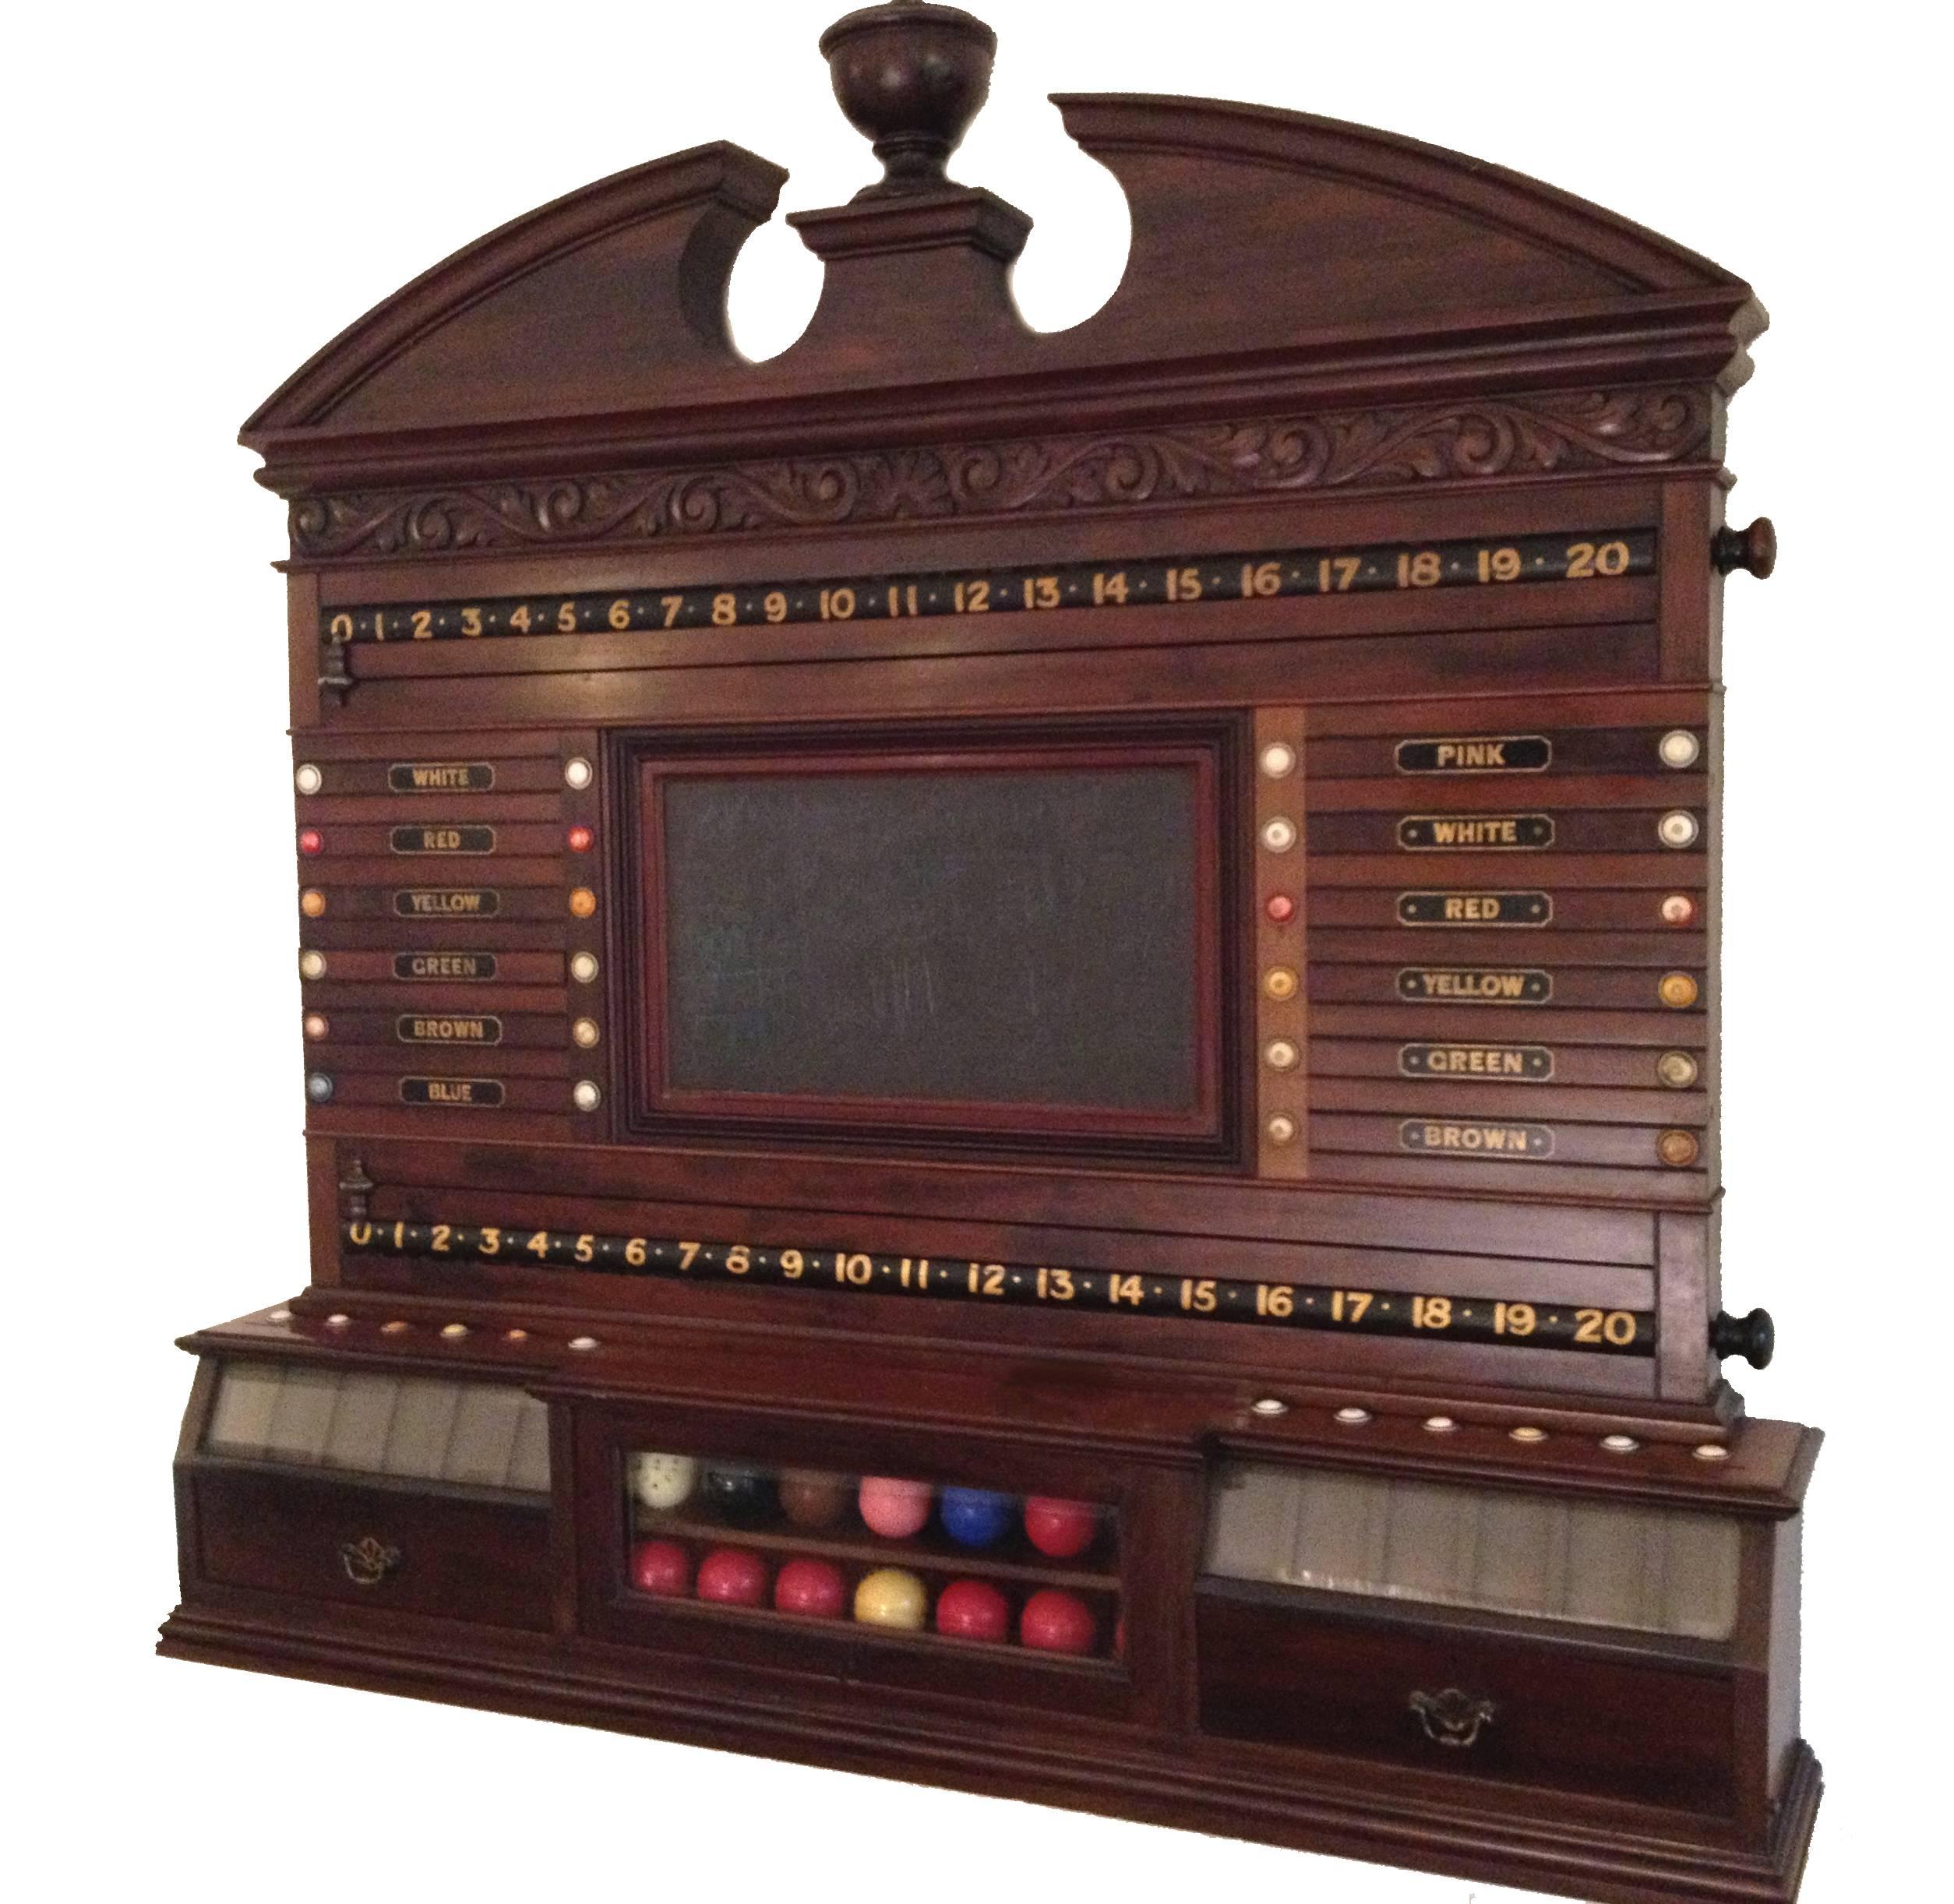 This beautiful wall-mounted mahogany scoring cabinet was made circa 1880, it features a decorative carved pediment, a central reversible mirror panel flanked by Life pool sliders and revolving number bars, all mounted on a ball storage box with